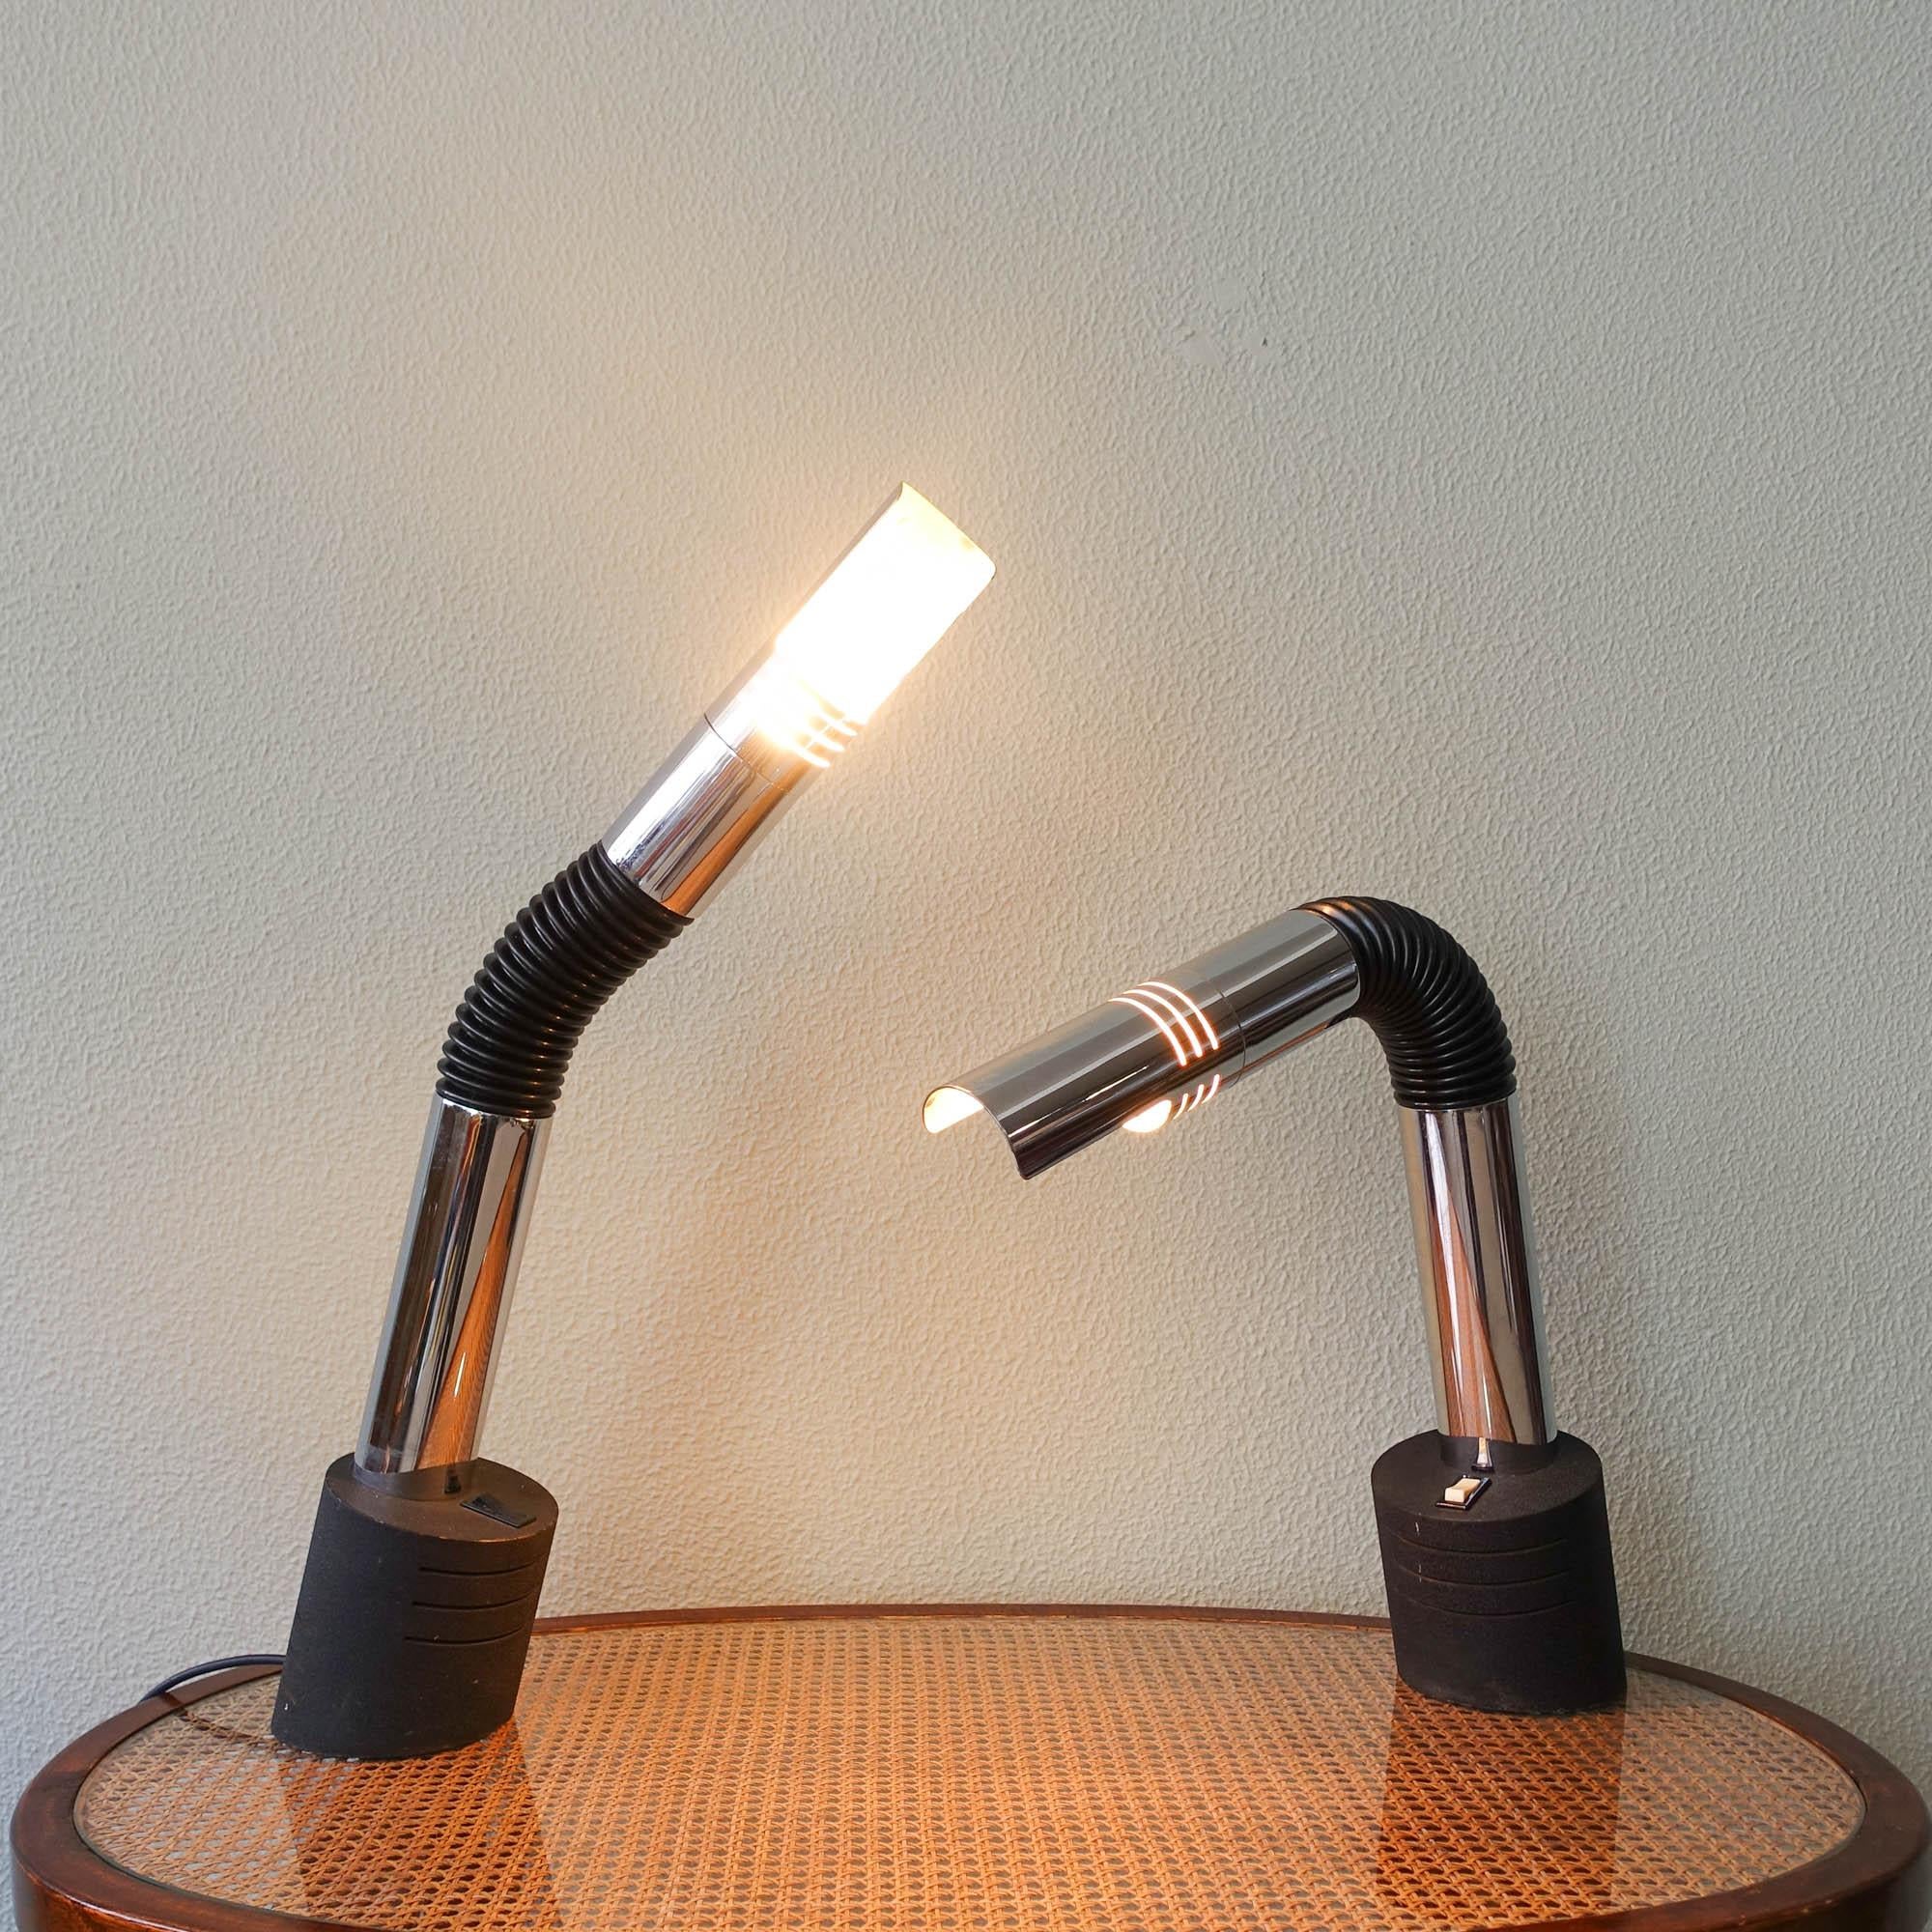 Metal Pair of “Elbow” Table Lamp by E. Bellini for Targetti Sankey, 1970s